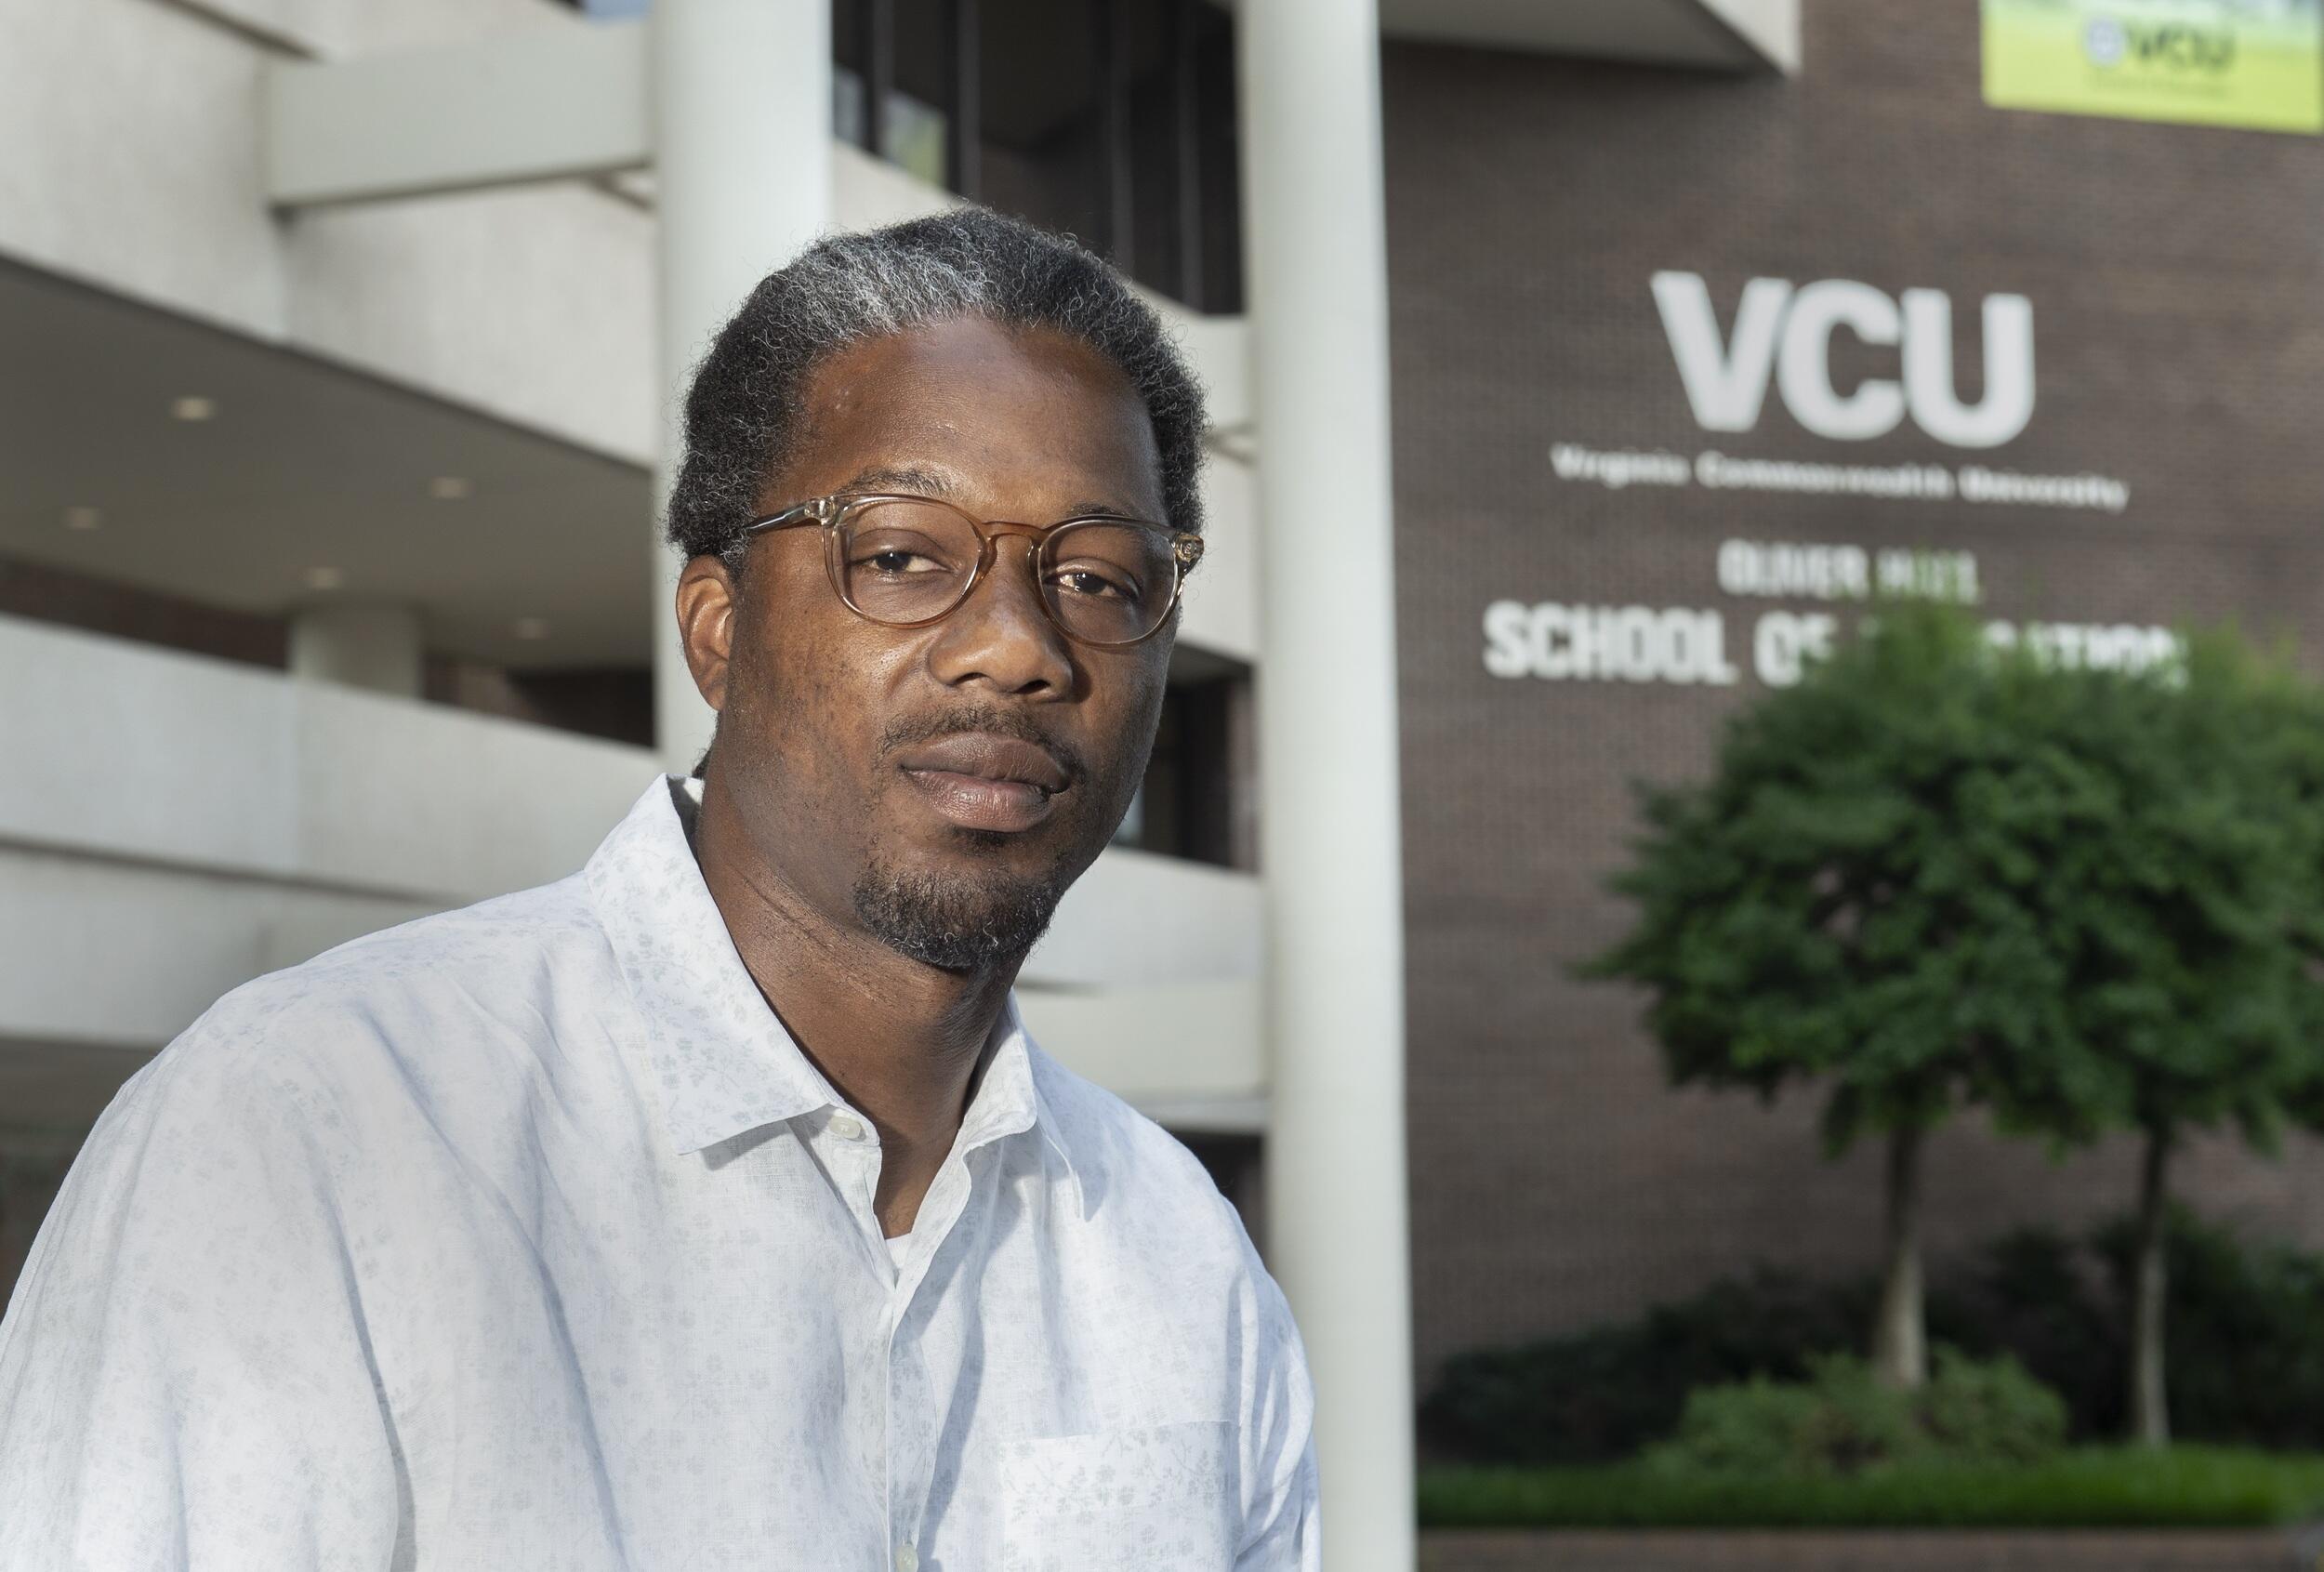 Dwayne Ray Cormier, Ph.D., pictured in front of the VCU School of Education building.